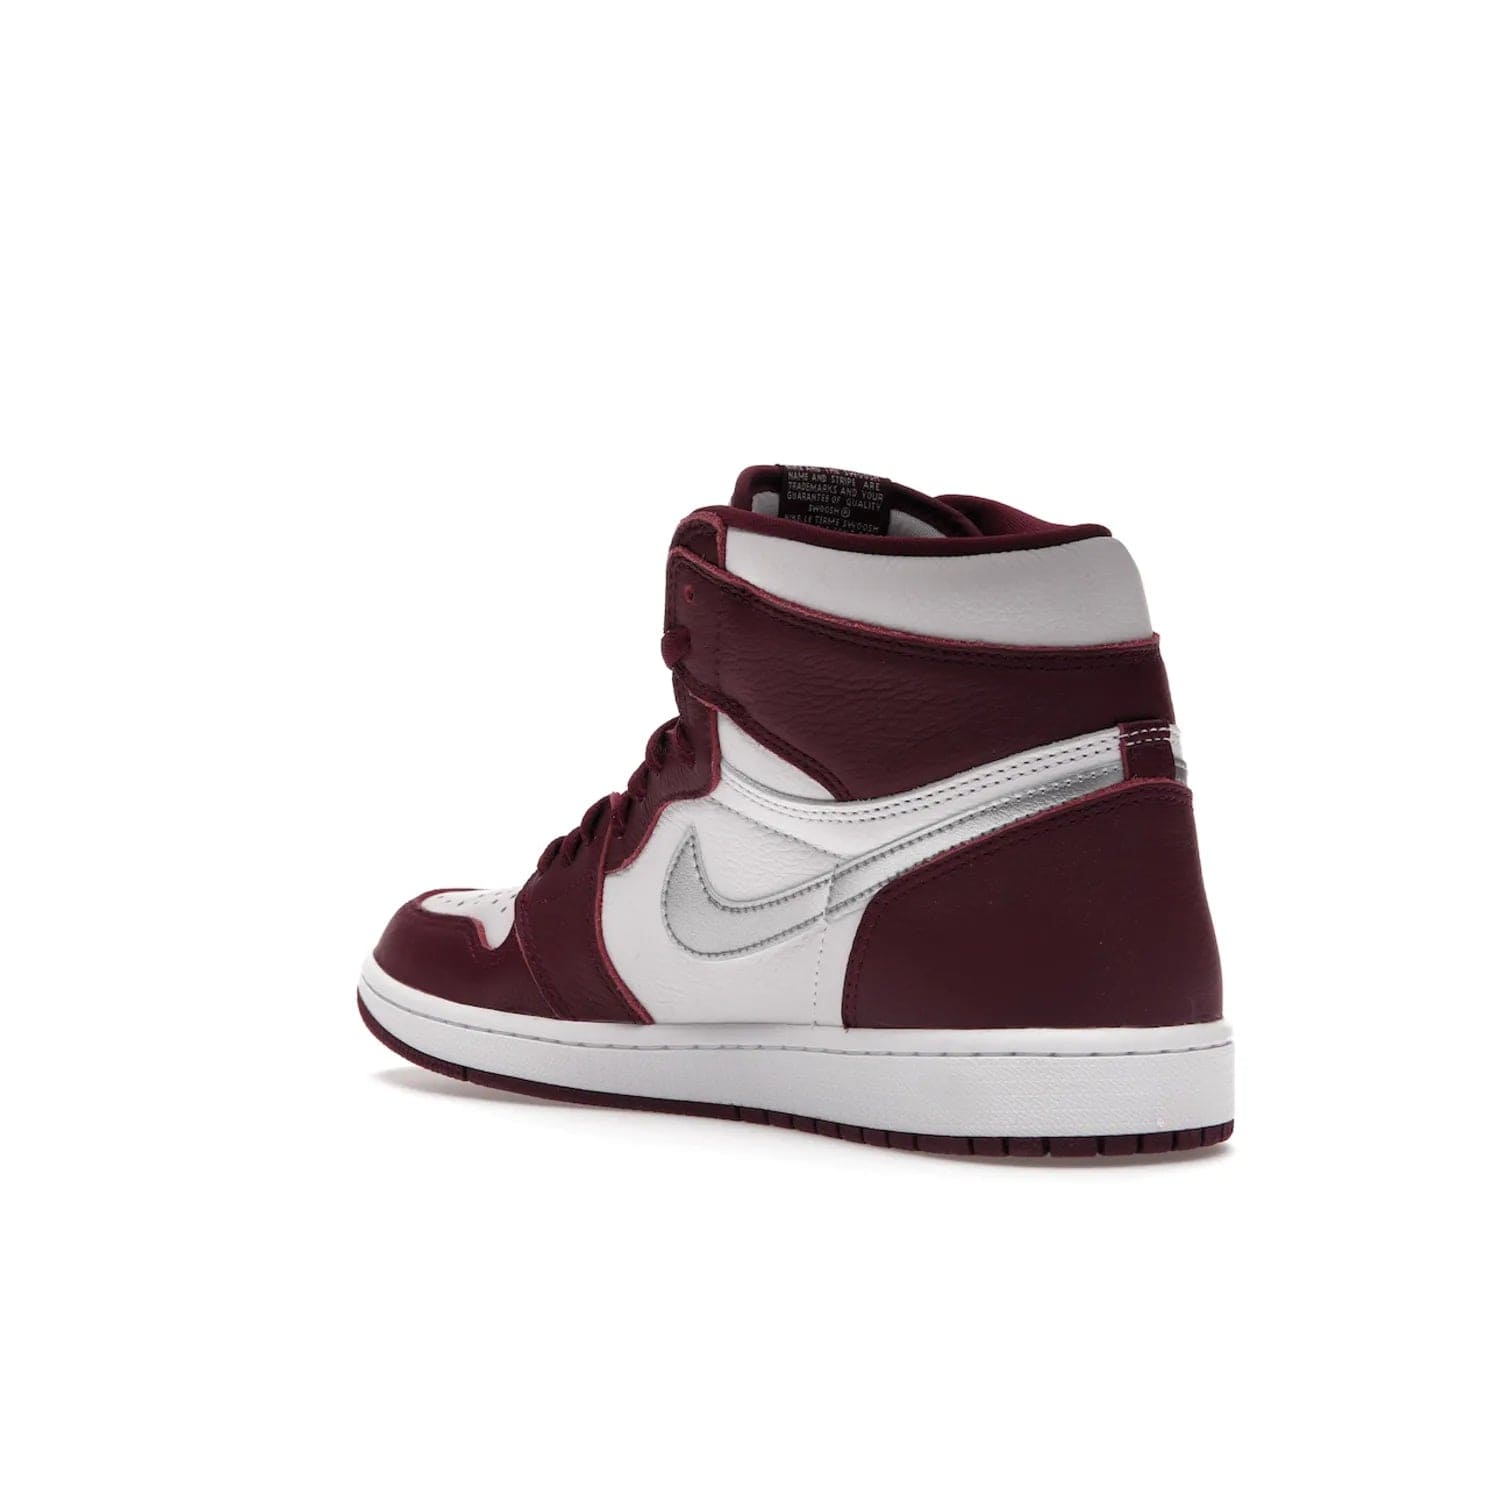 Jordan 1 Retro High OG Bordeaux - Image 24 - Only at www.BallersClubKickz.com - Shop the classic Air Jordan 1 High Bordeaux with a modern high-top cut. The timeless Bordeaux and White-Metallic Silver colorway, releasing Nov 20, 2021, is perfect for practice or a night out.